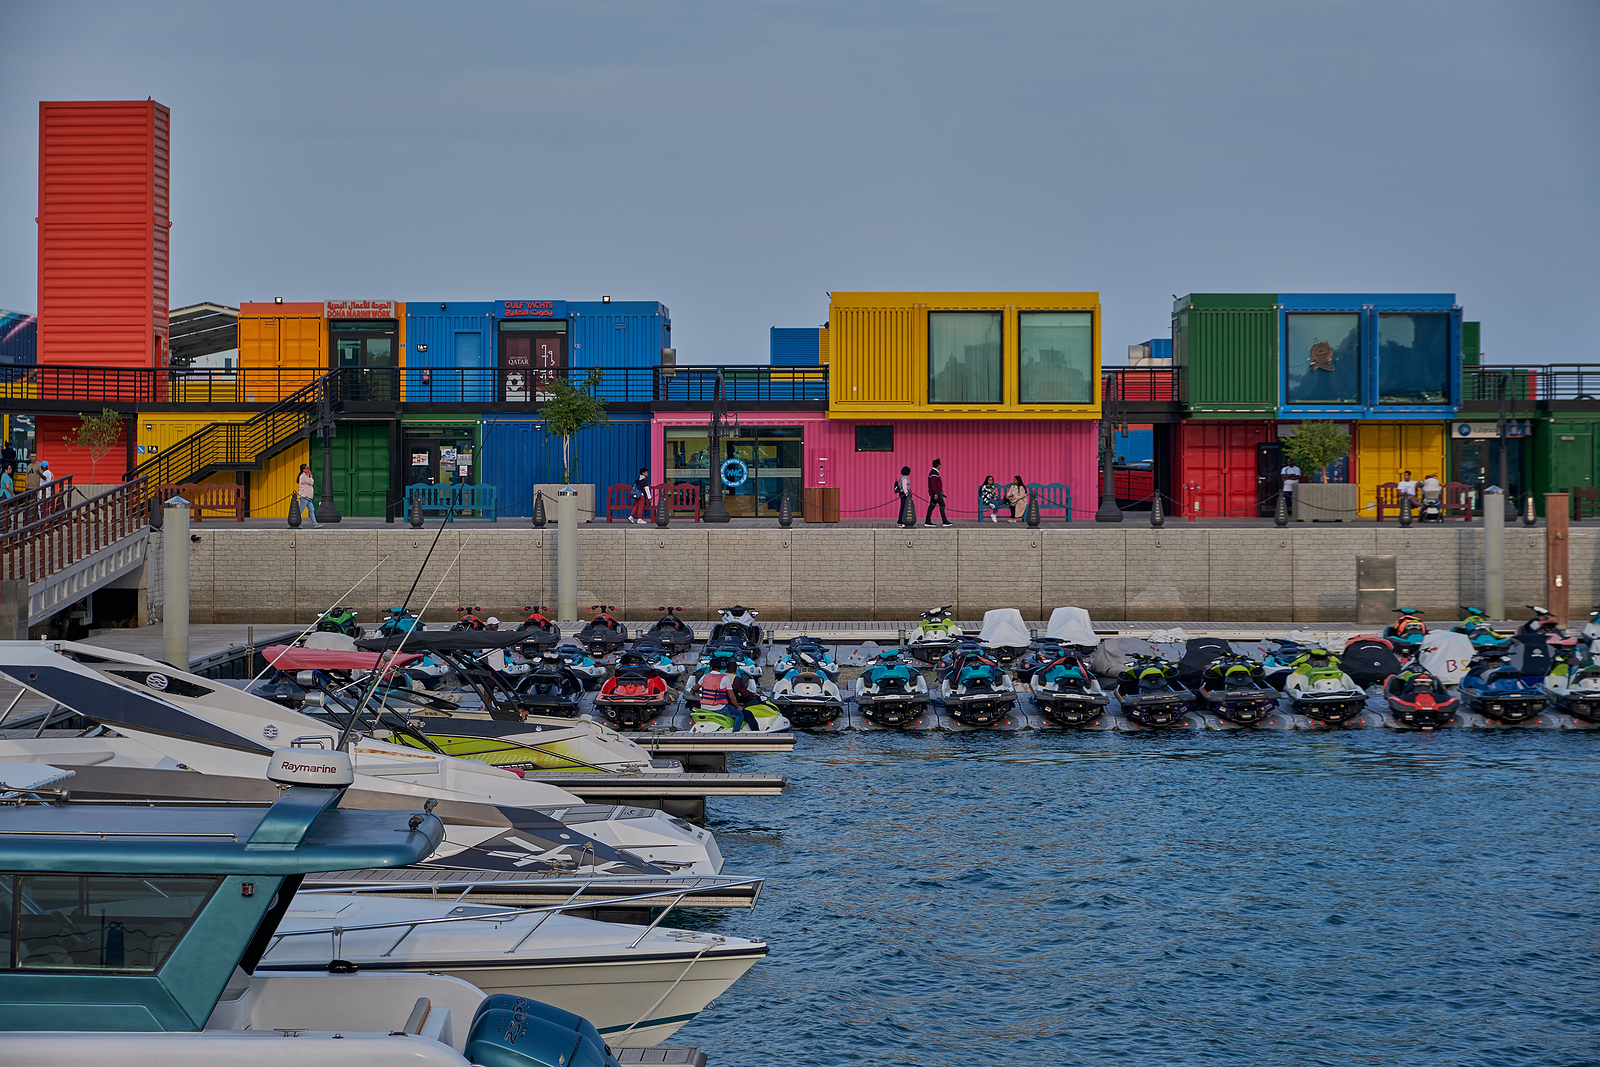 Doha, Qatar - December 23 2022: Box Park, located at the old Doha Port, is a leisure destination in Qatar. Made of colorful recycled containers with scenic panoramic views